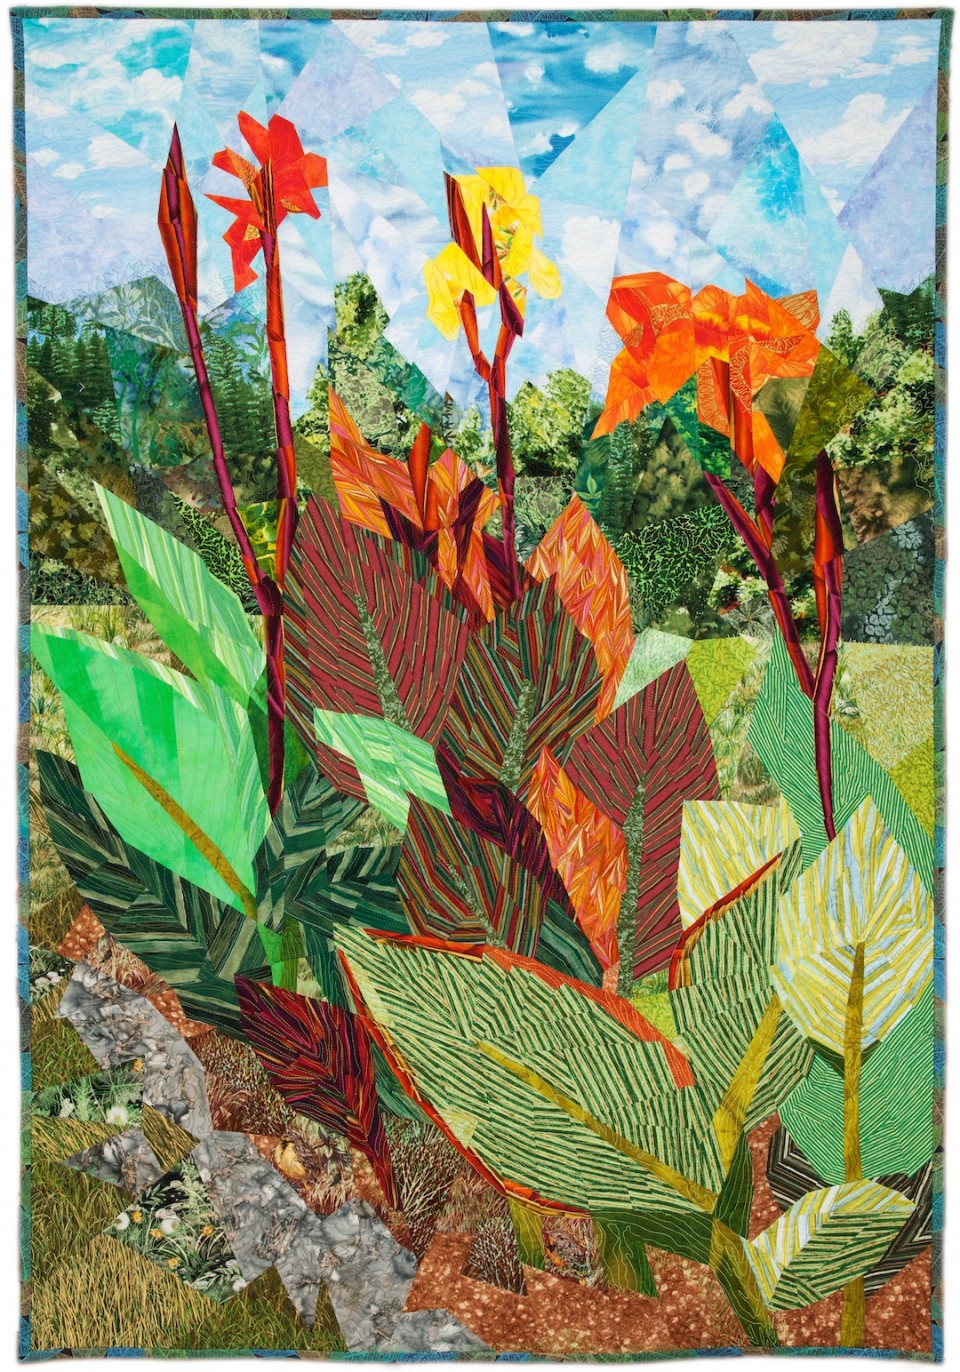 Ann Harwell, Cannas of the Field, quilte tapestry, 37 x 56